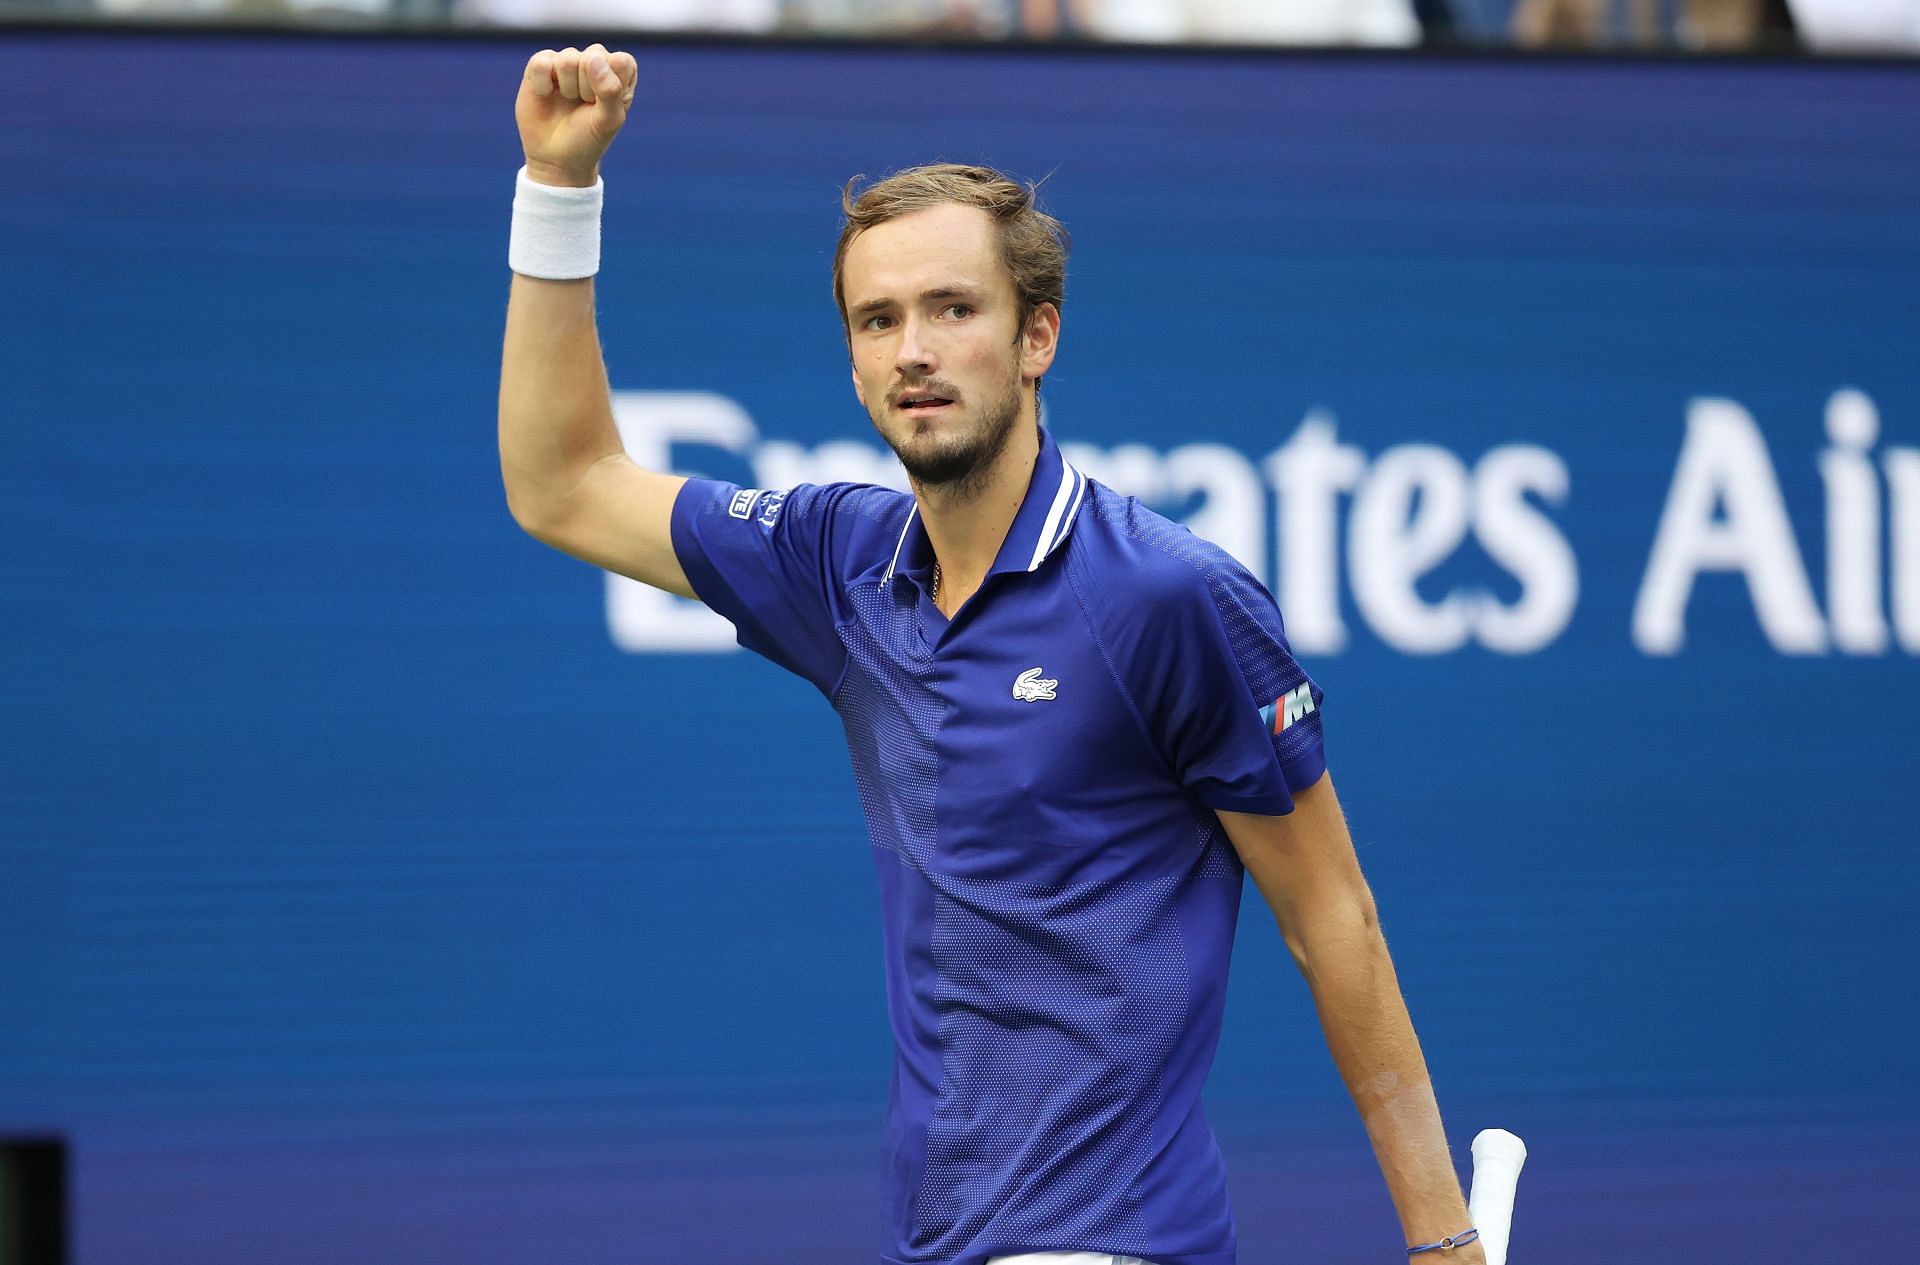 Daniil Medvedev will kick off his North American hardcourt swing at the Los Cabos Open in Mexico